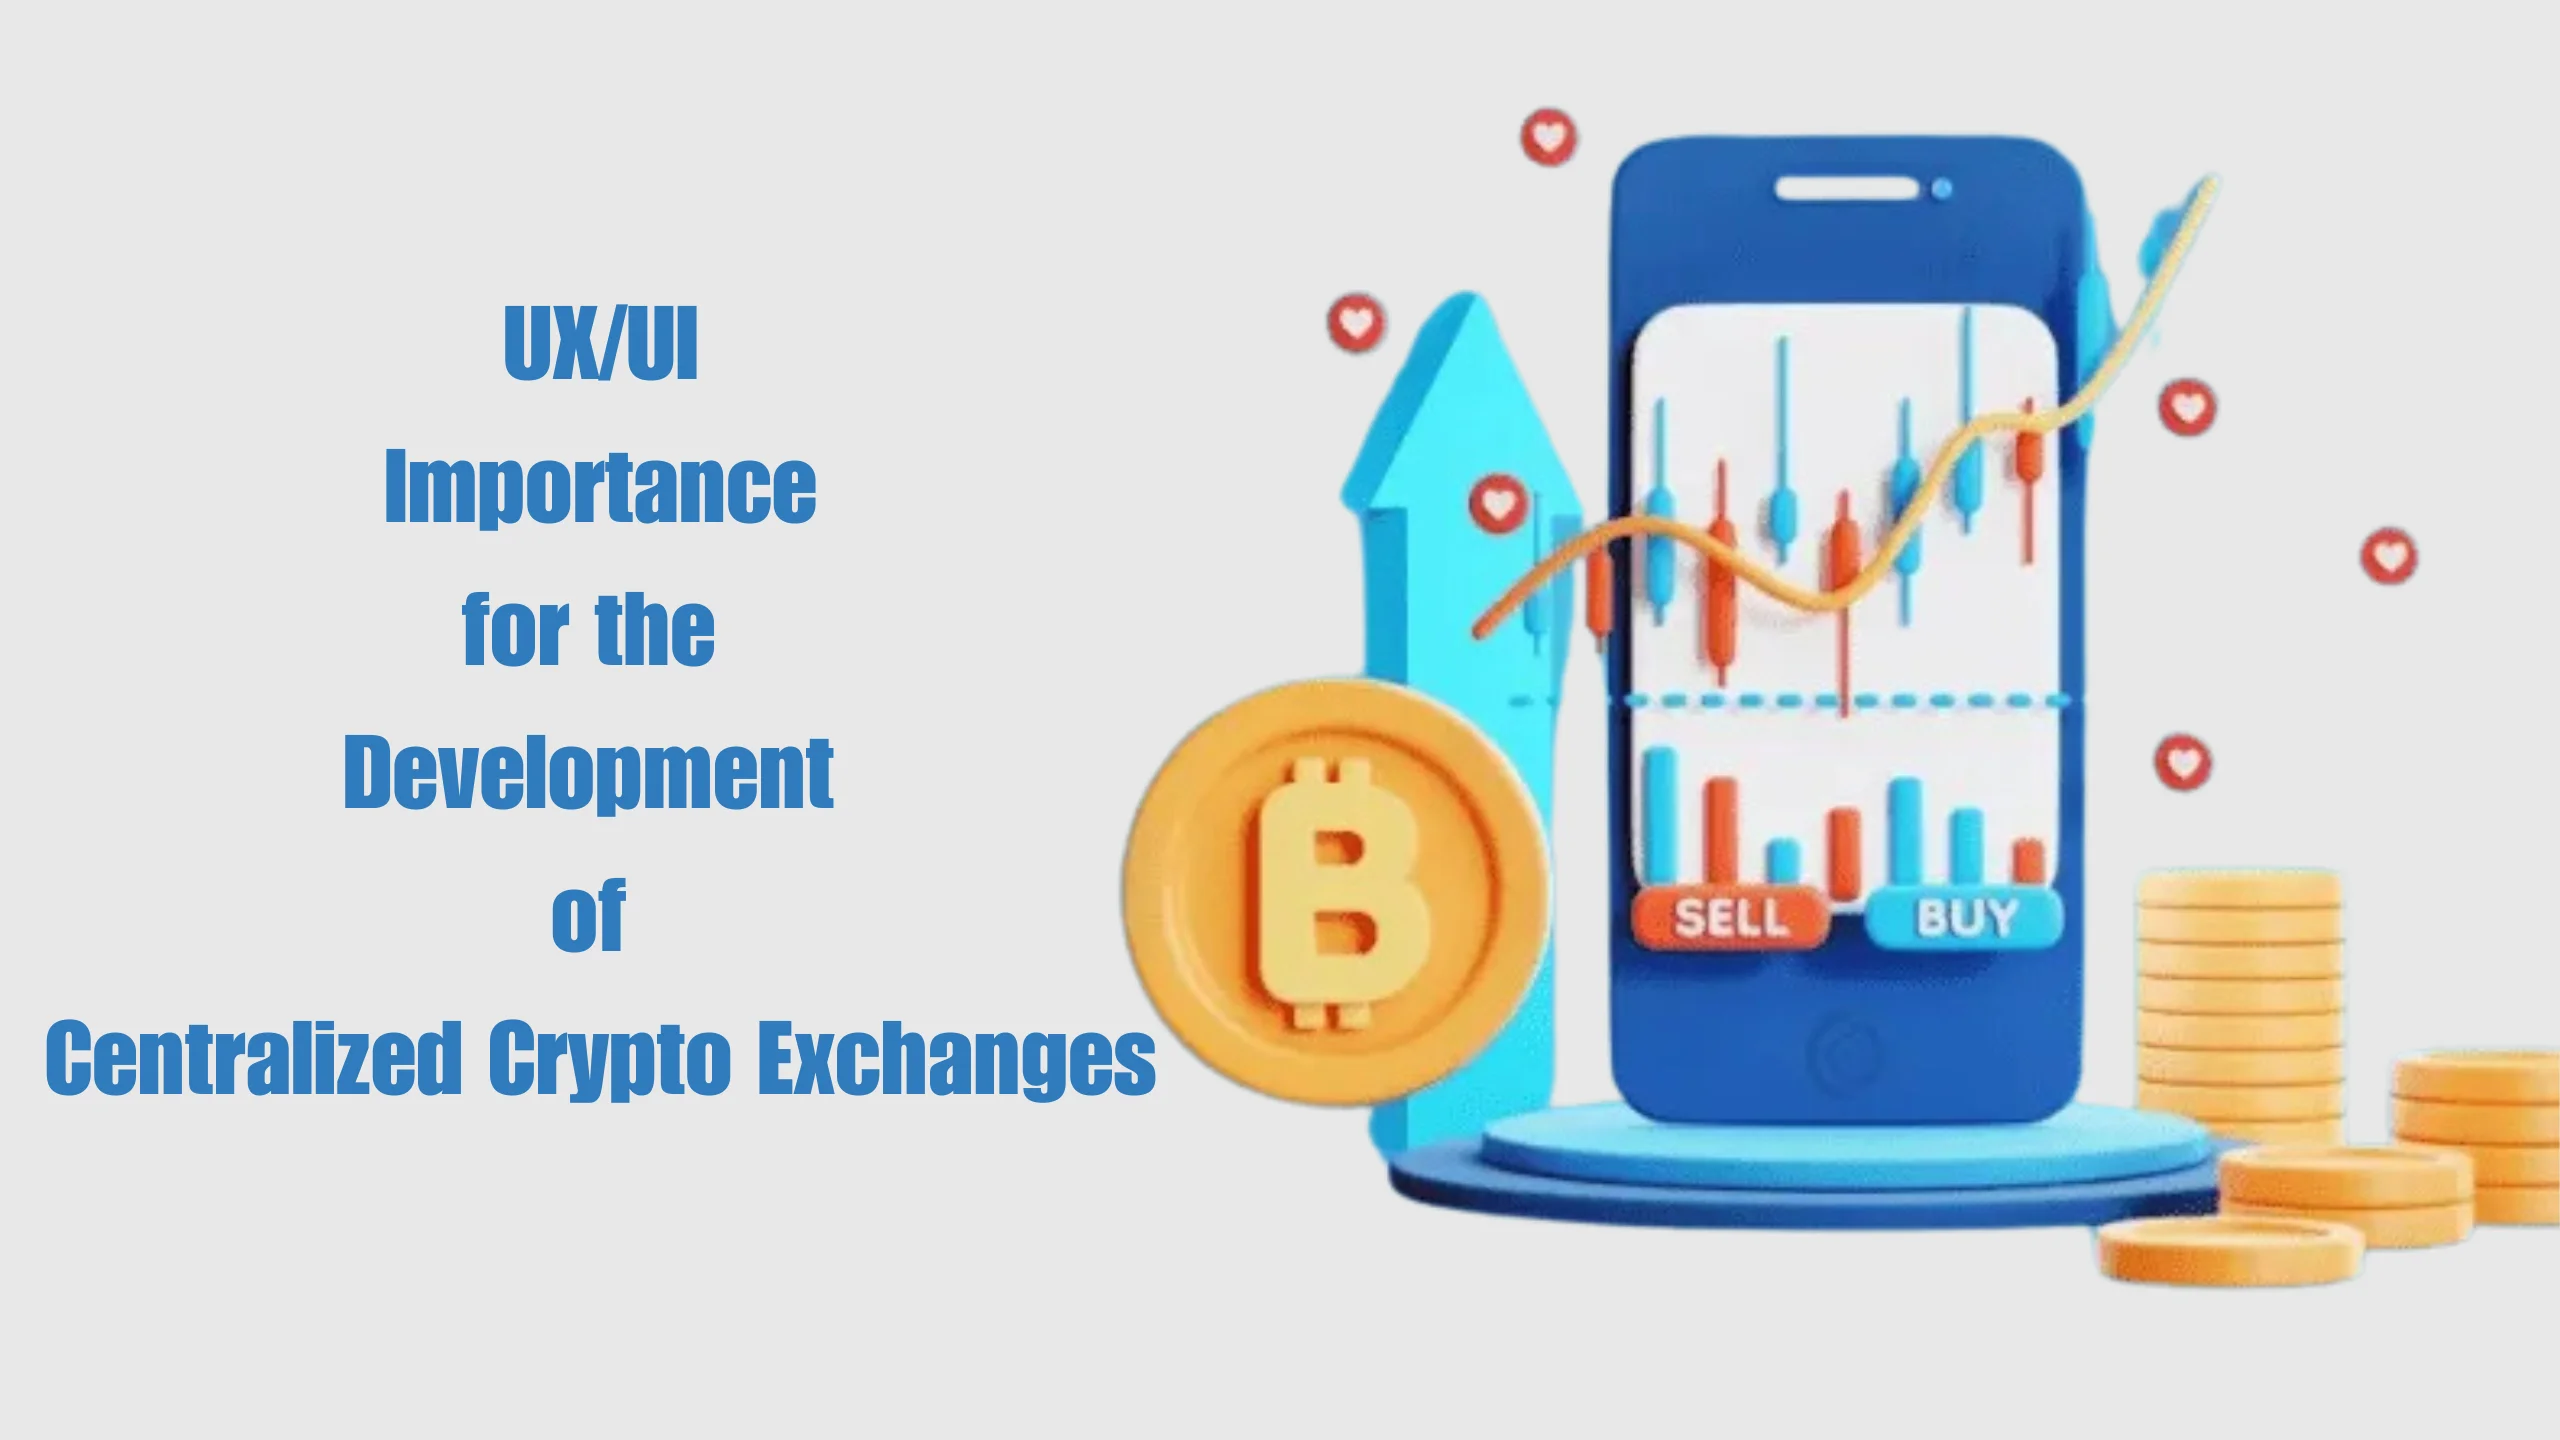 Significance of UX/UI in developing centralized crypto exchanges, emphasizing user experience and interface design.